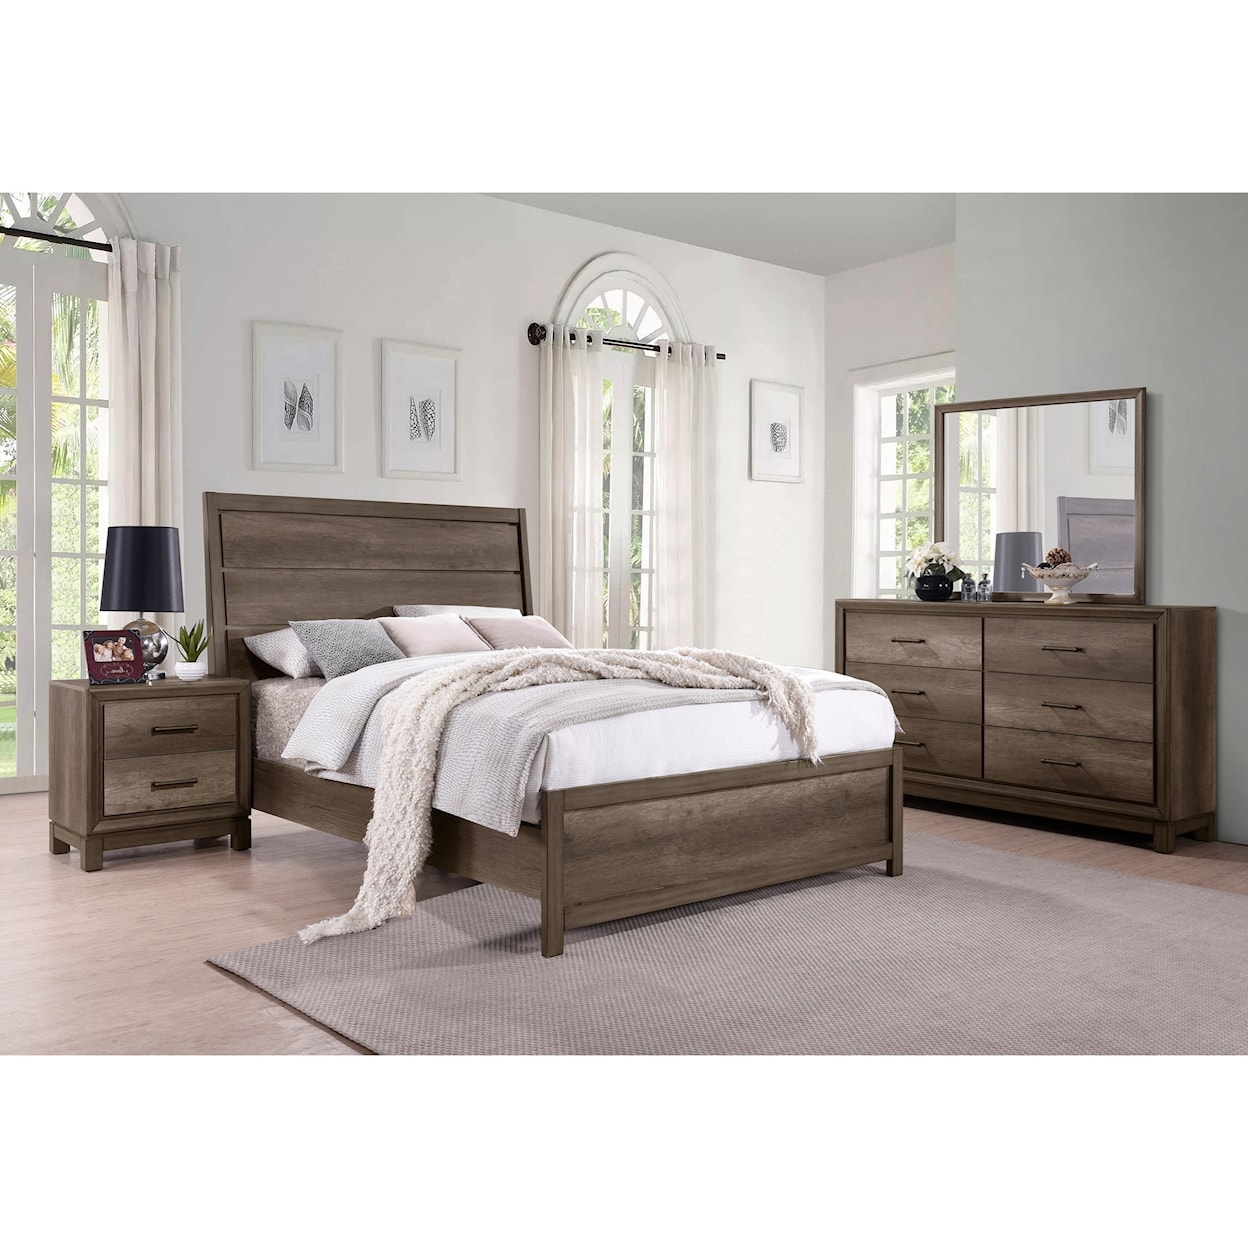 Samuel Lawrence Hanover Square Queen Bedroom Group